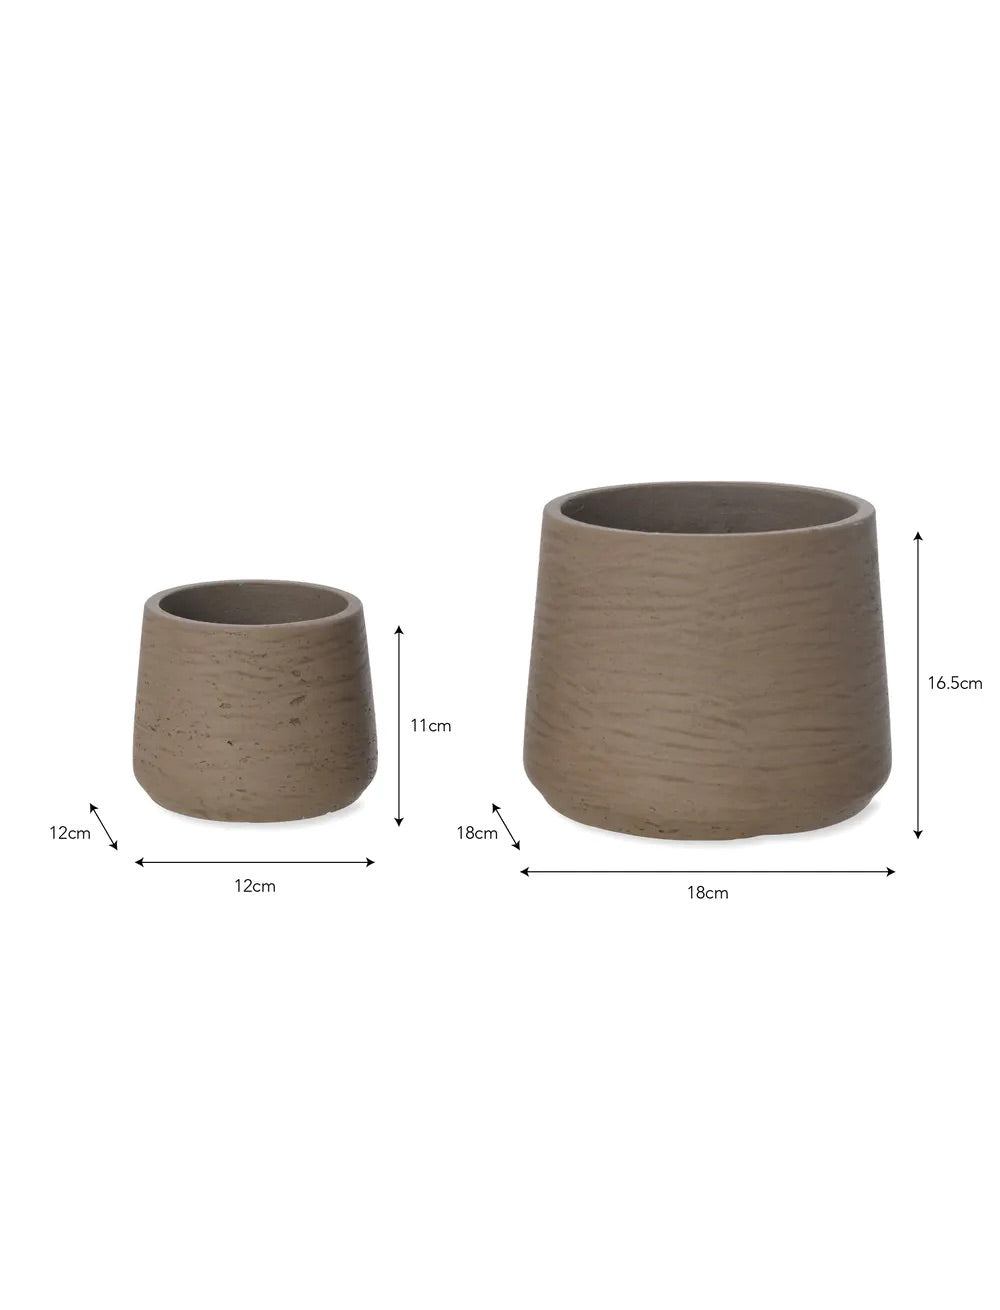 Warm Stone Tapered Cement Plant Pots - Set of 2 measurements